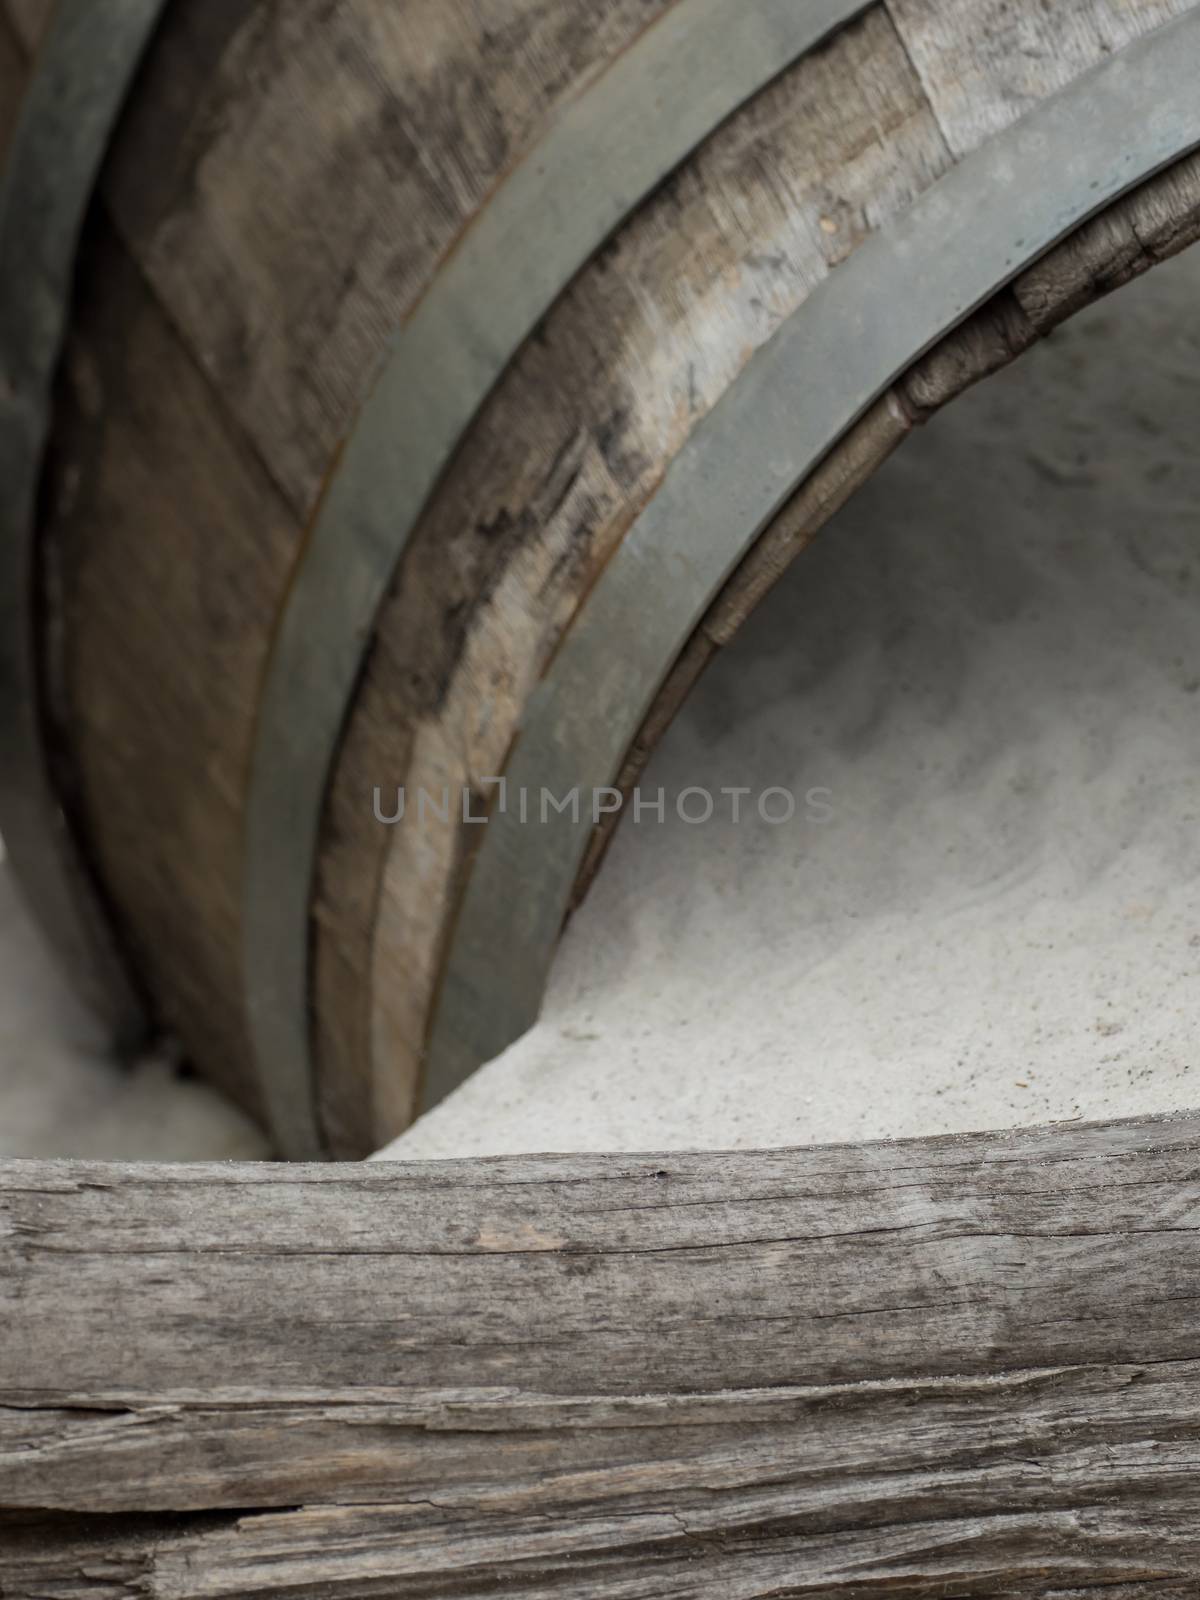 An old wooden barrel lies in the sand